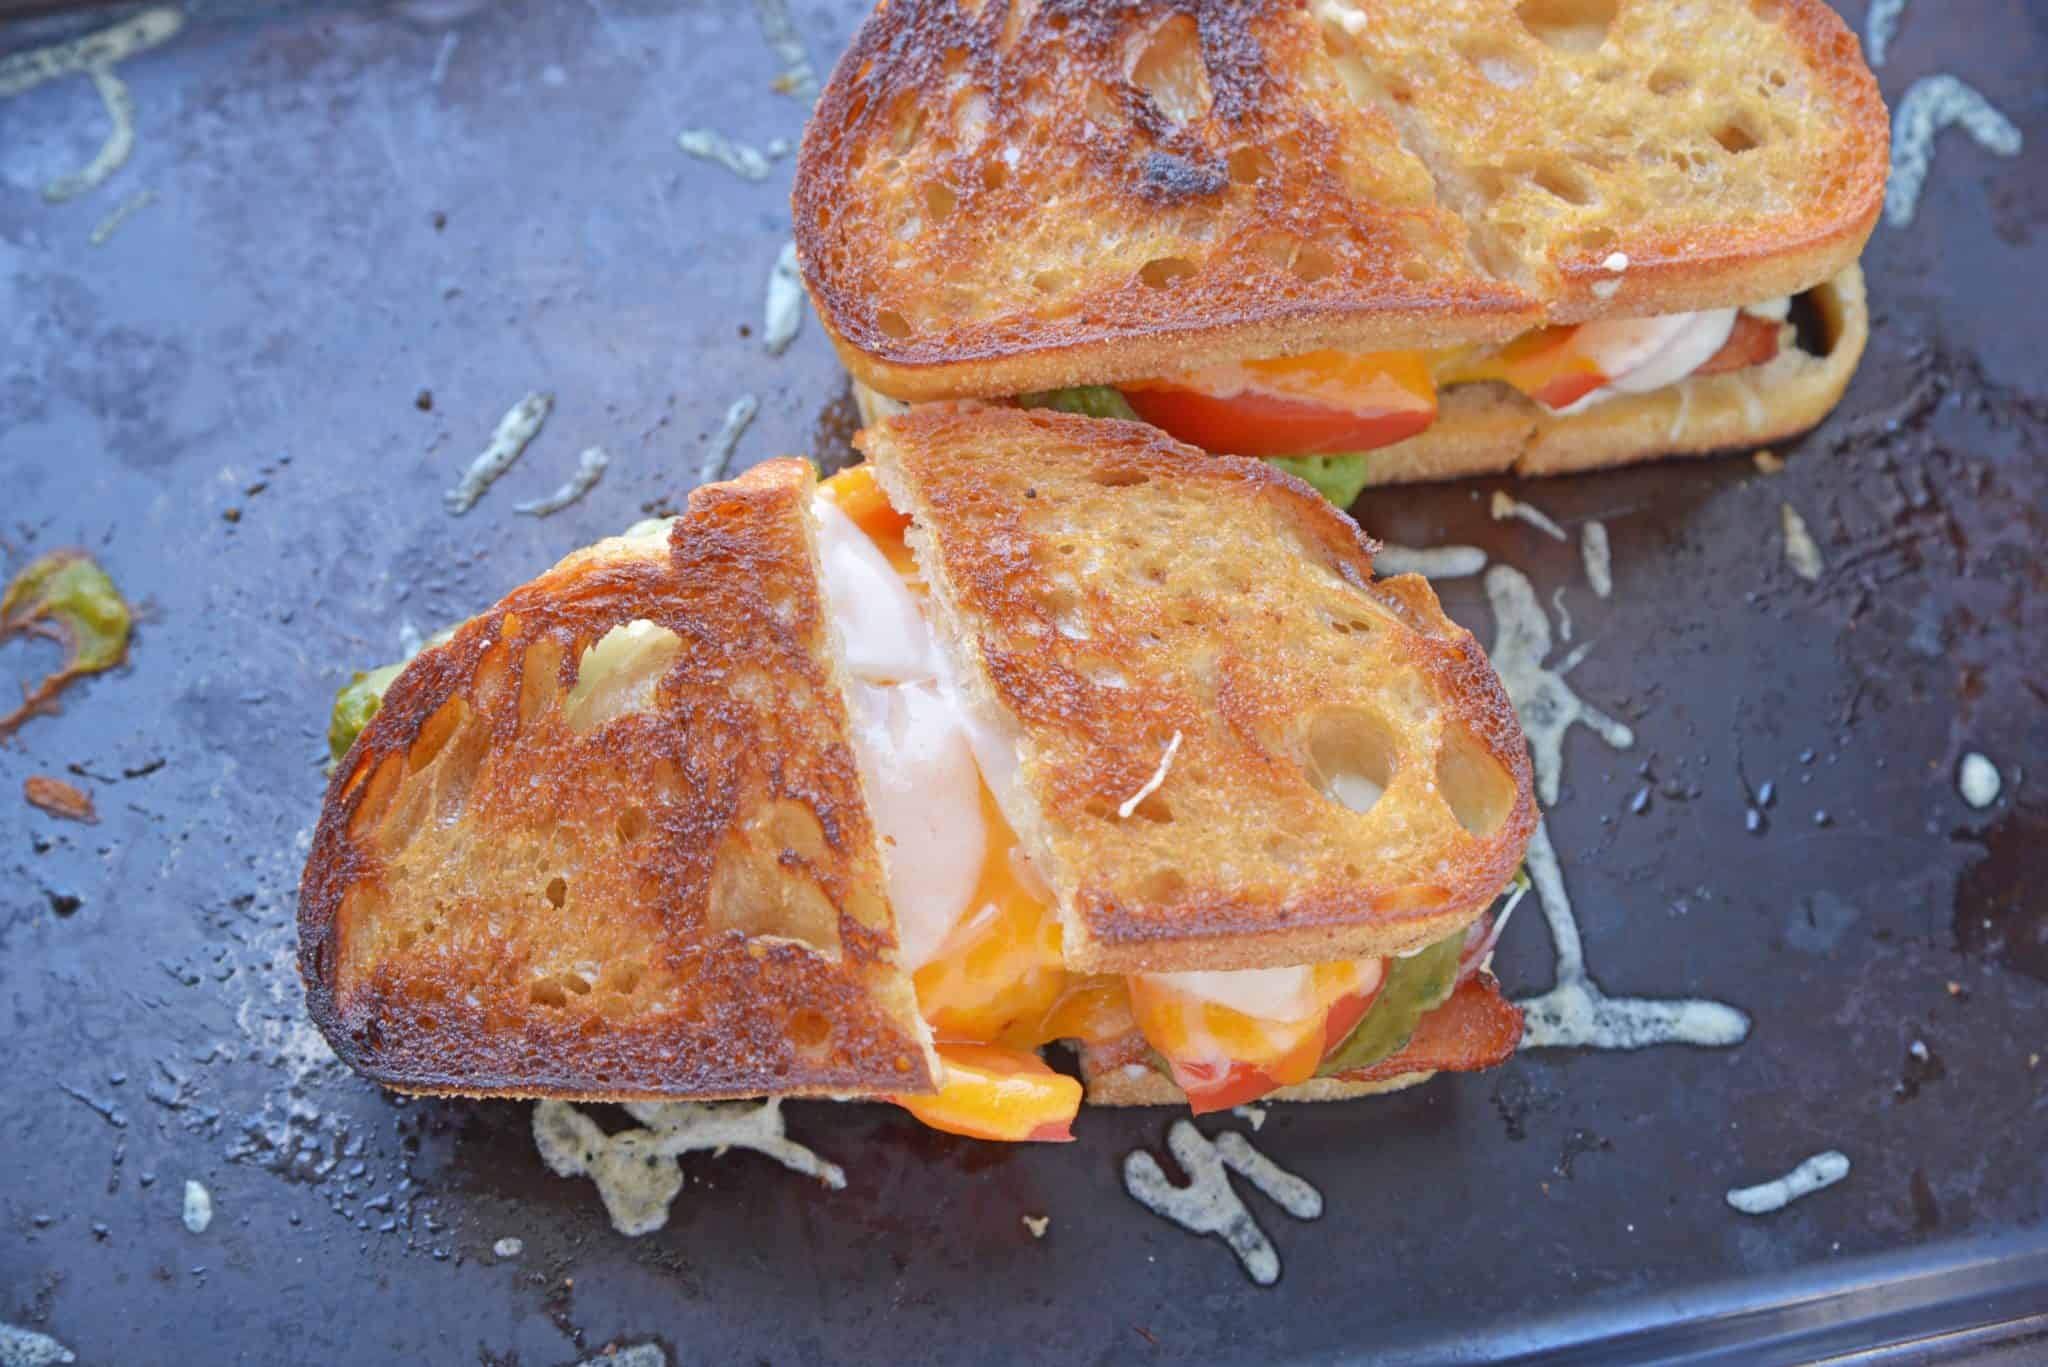 Bacon Avocado Grilled Cheese Sandwiches are made from a three cheese blend along with zesty guacamole, lime, and bacon, for out of this world sandwich experience! #howtomakegrilledcheese #gourmetgrilledcheese #avocadogrilledcheese www.savoryexperiments.com